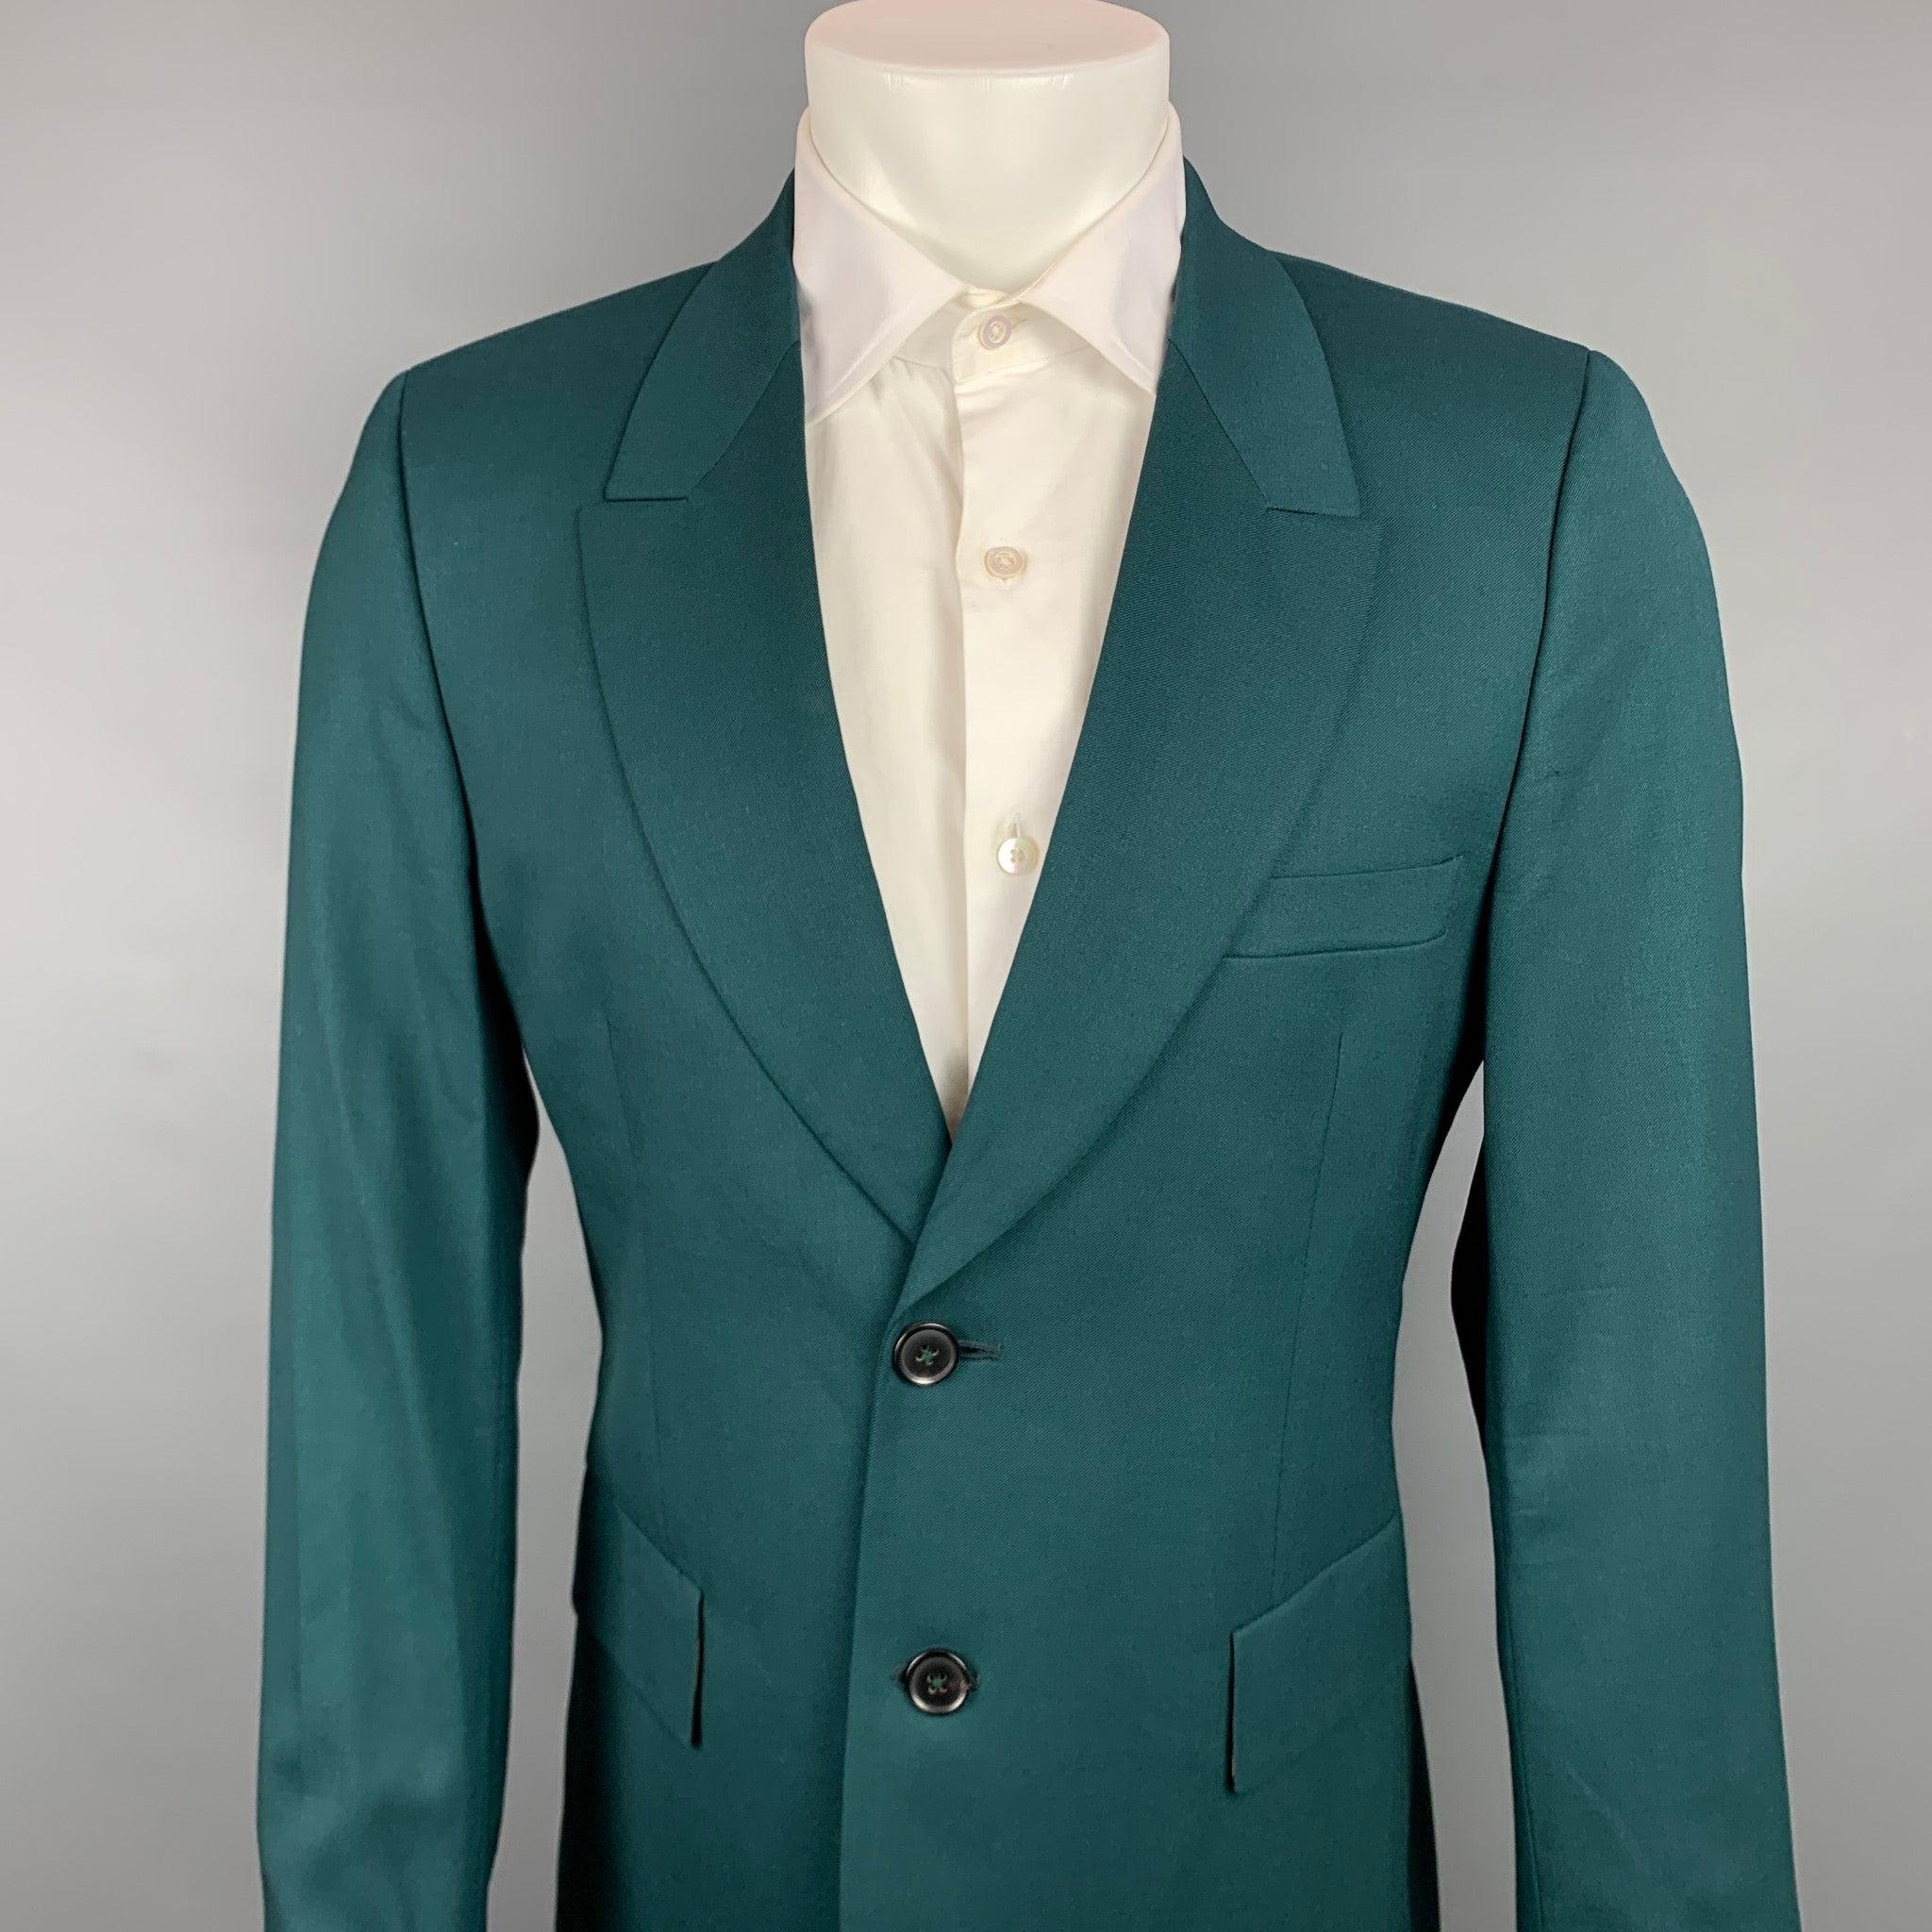 PAUL SMITH sport coat comes in a green wool with a full print liner featuring a notch lapel, flap pockets, and a two button closure. Made in Italy.Very Good
Pre-Owned Condition. 

Marked:   42 

Measurements: 
 
Shoulder: 17 inches  Chest: 40 inches